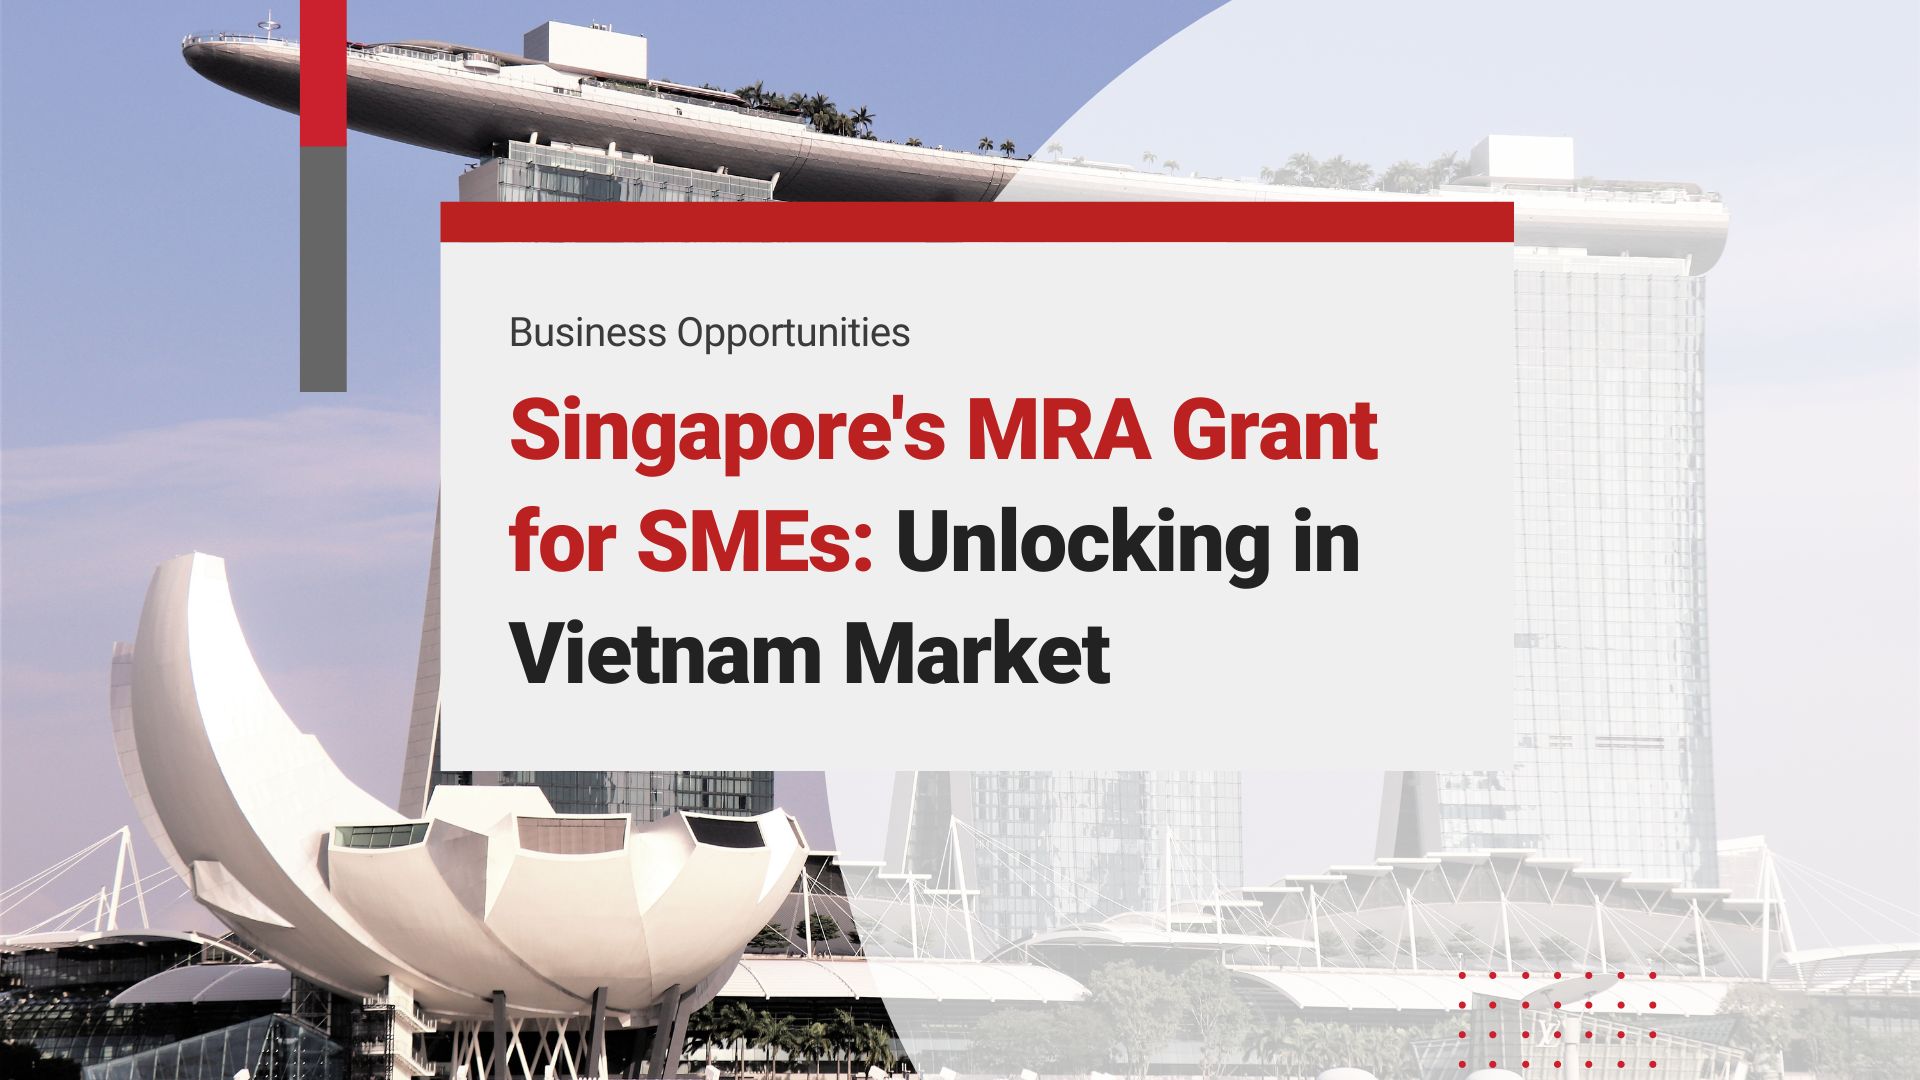 Singapore’s MRA Grant for SMEs: Case Studies from Milieu and Cargosavvy